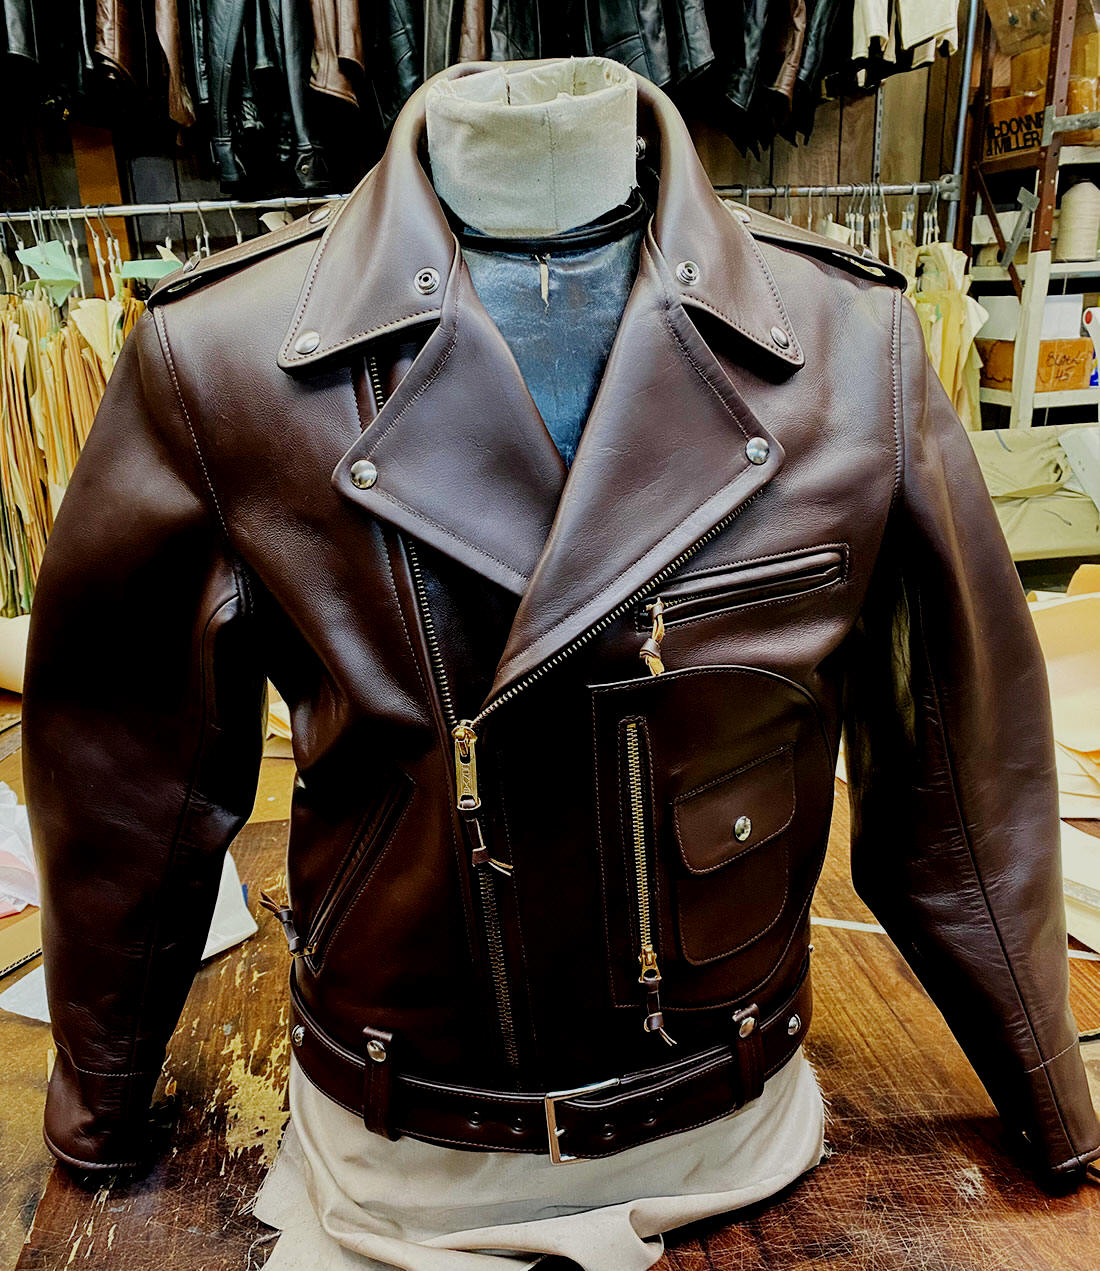 Vintage 1950s Buco J23 Russet Horsehide Motorcycle Jacket Lost Worlds USA